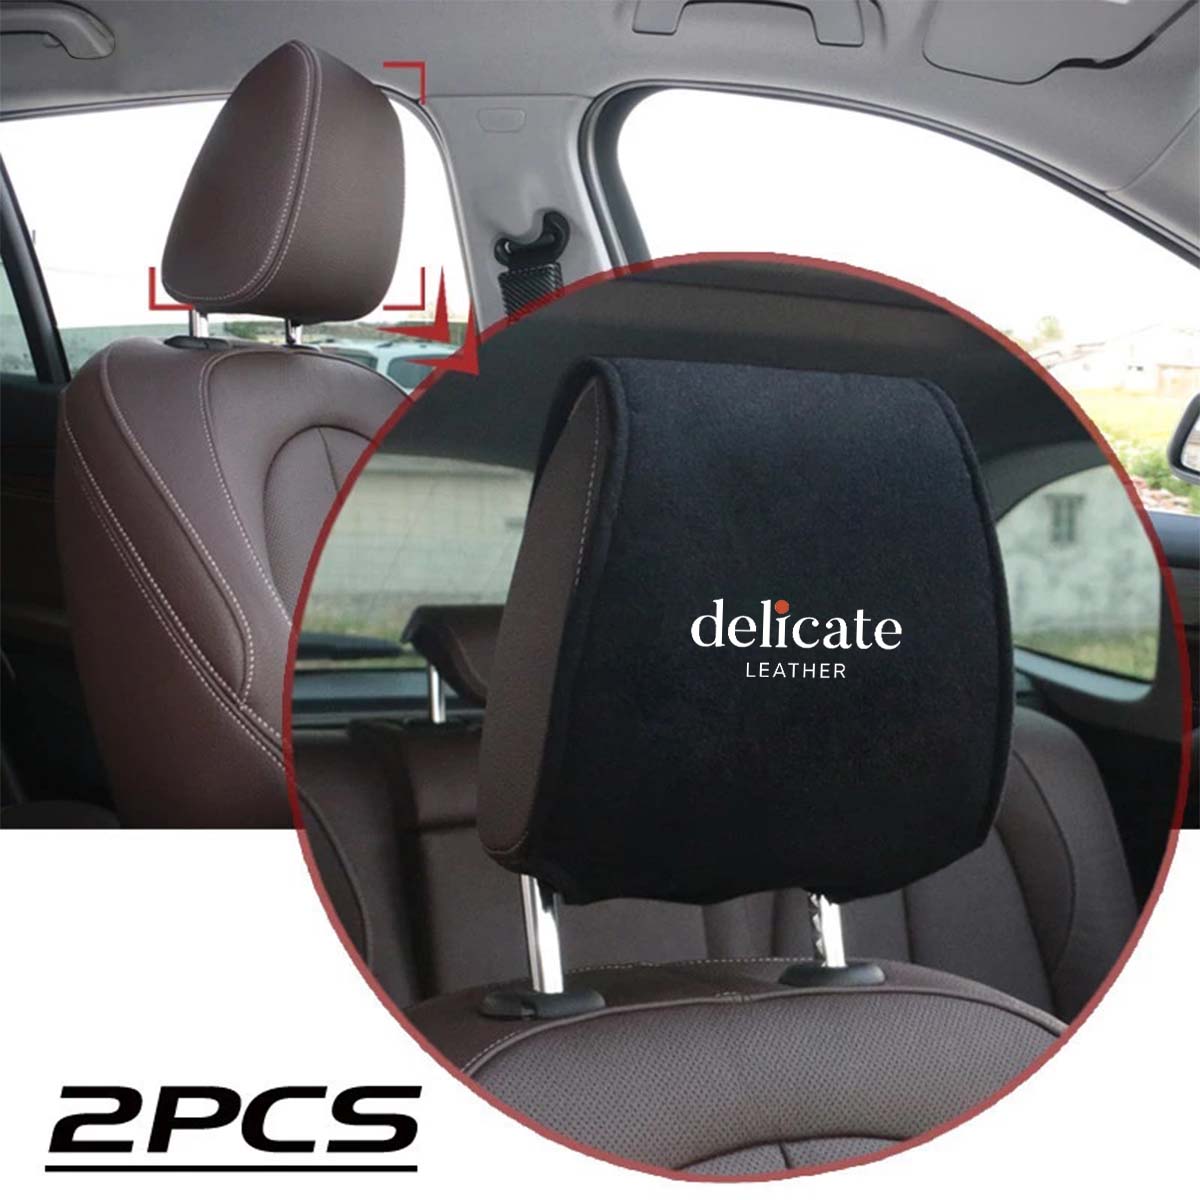 Delicate Leather Car Seat Headrest Cover Breathable Flexible Headrest Covers Velcro Auto Headrest Covers Universal Fit, Custom For Your Cars, Car Accessories PF13998 - Delicate Leather